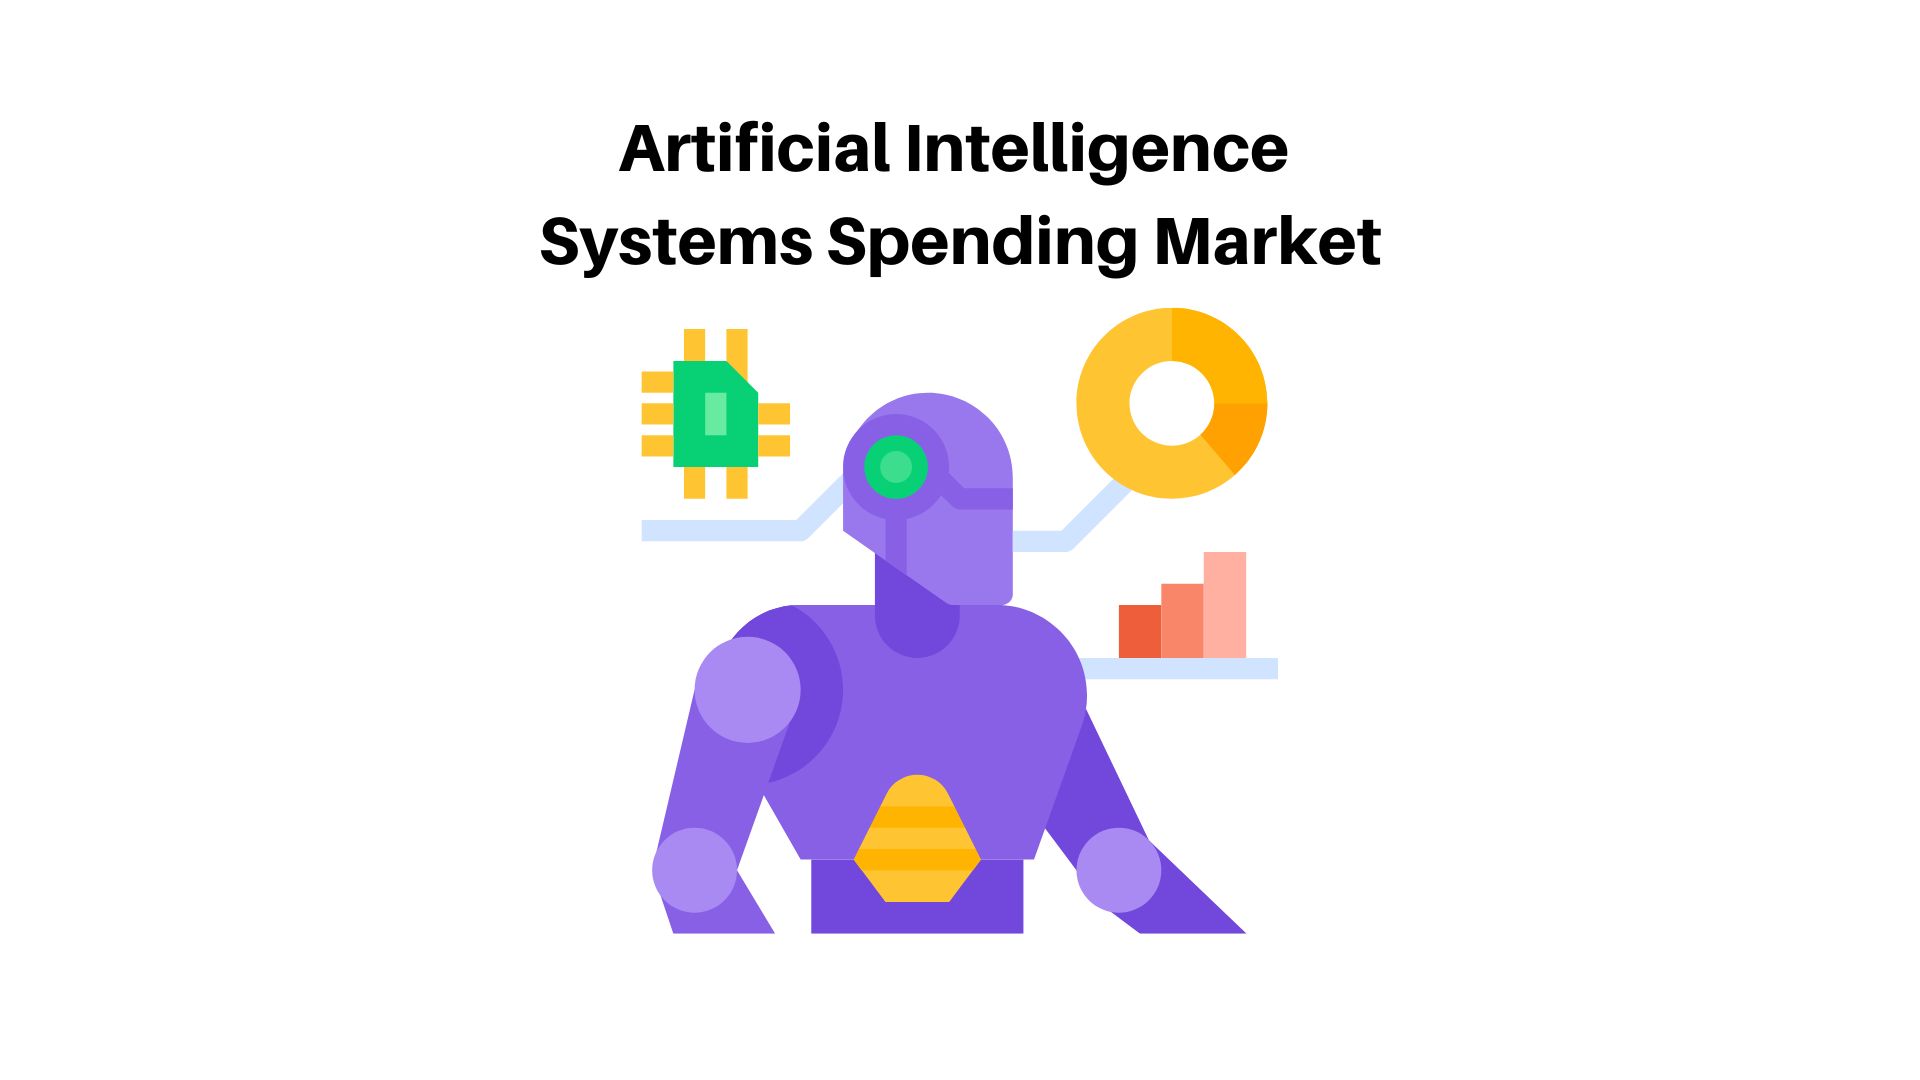 Artificial Intelligence Systems Spending Market Sales to Top USD 3625.08 Bn by 2032 | CAGR of 47.5%